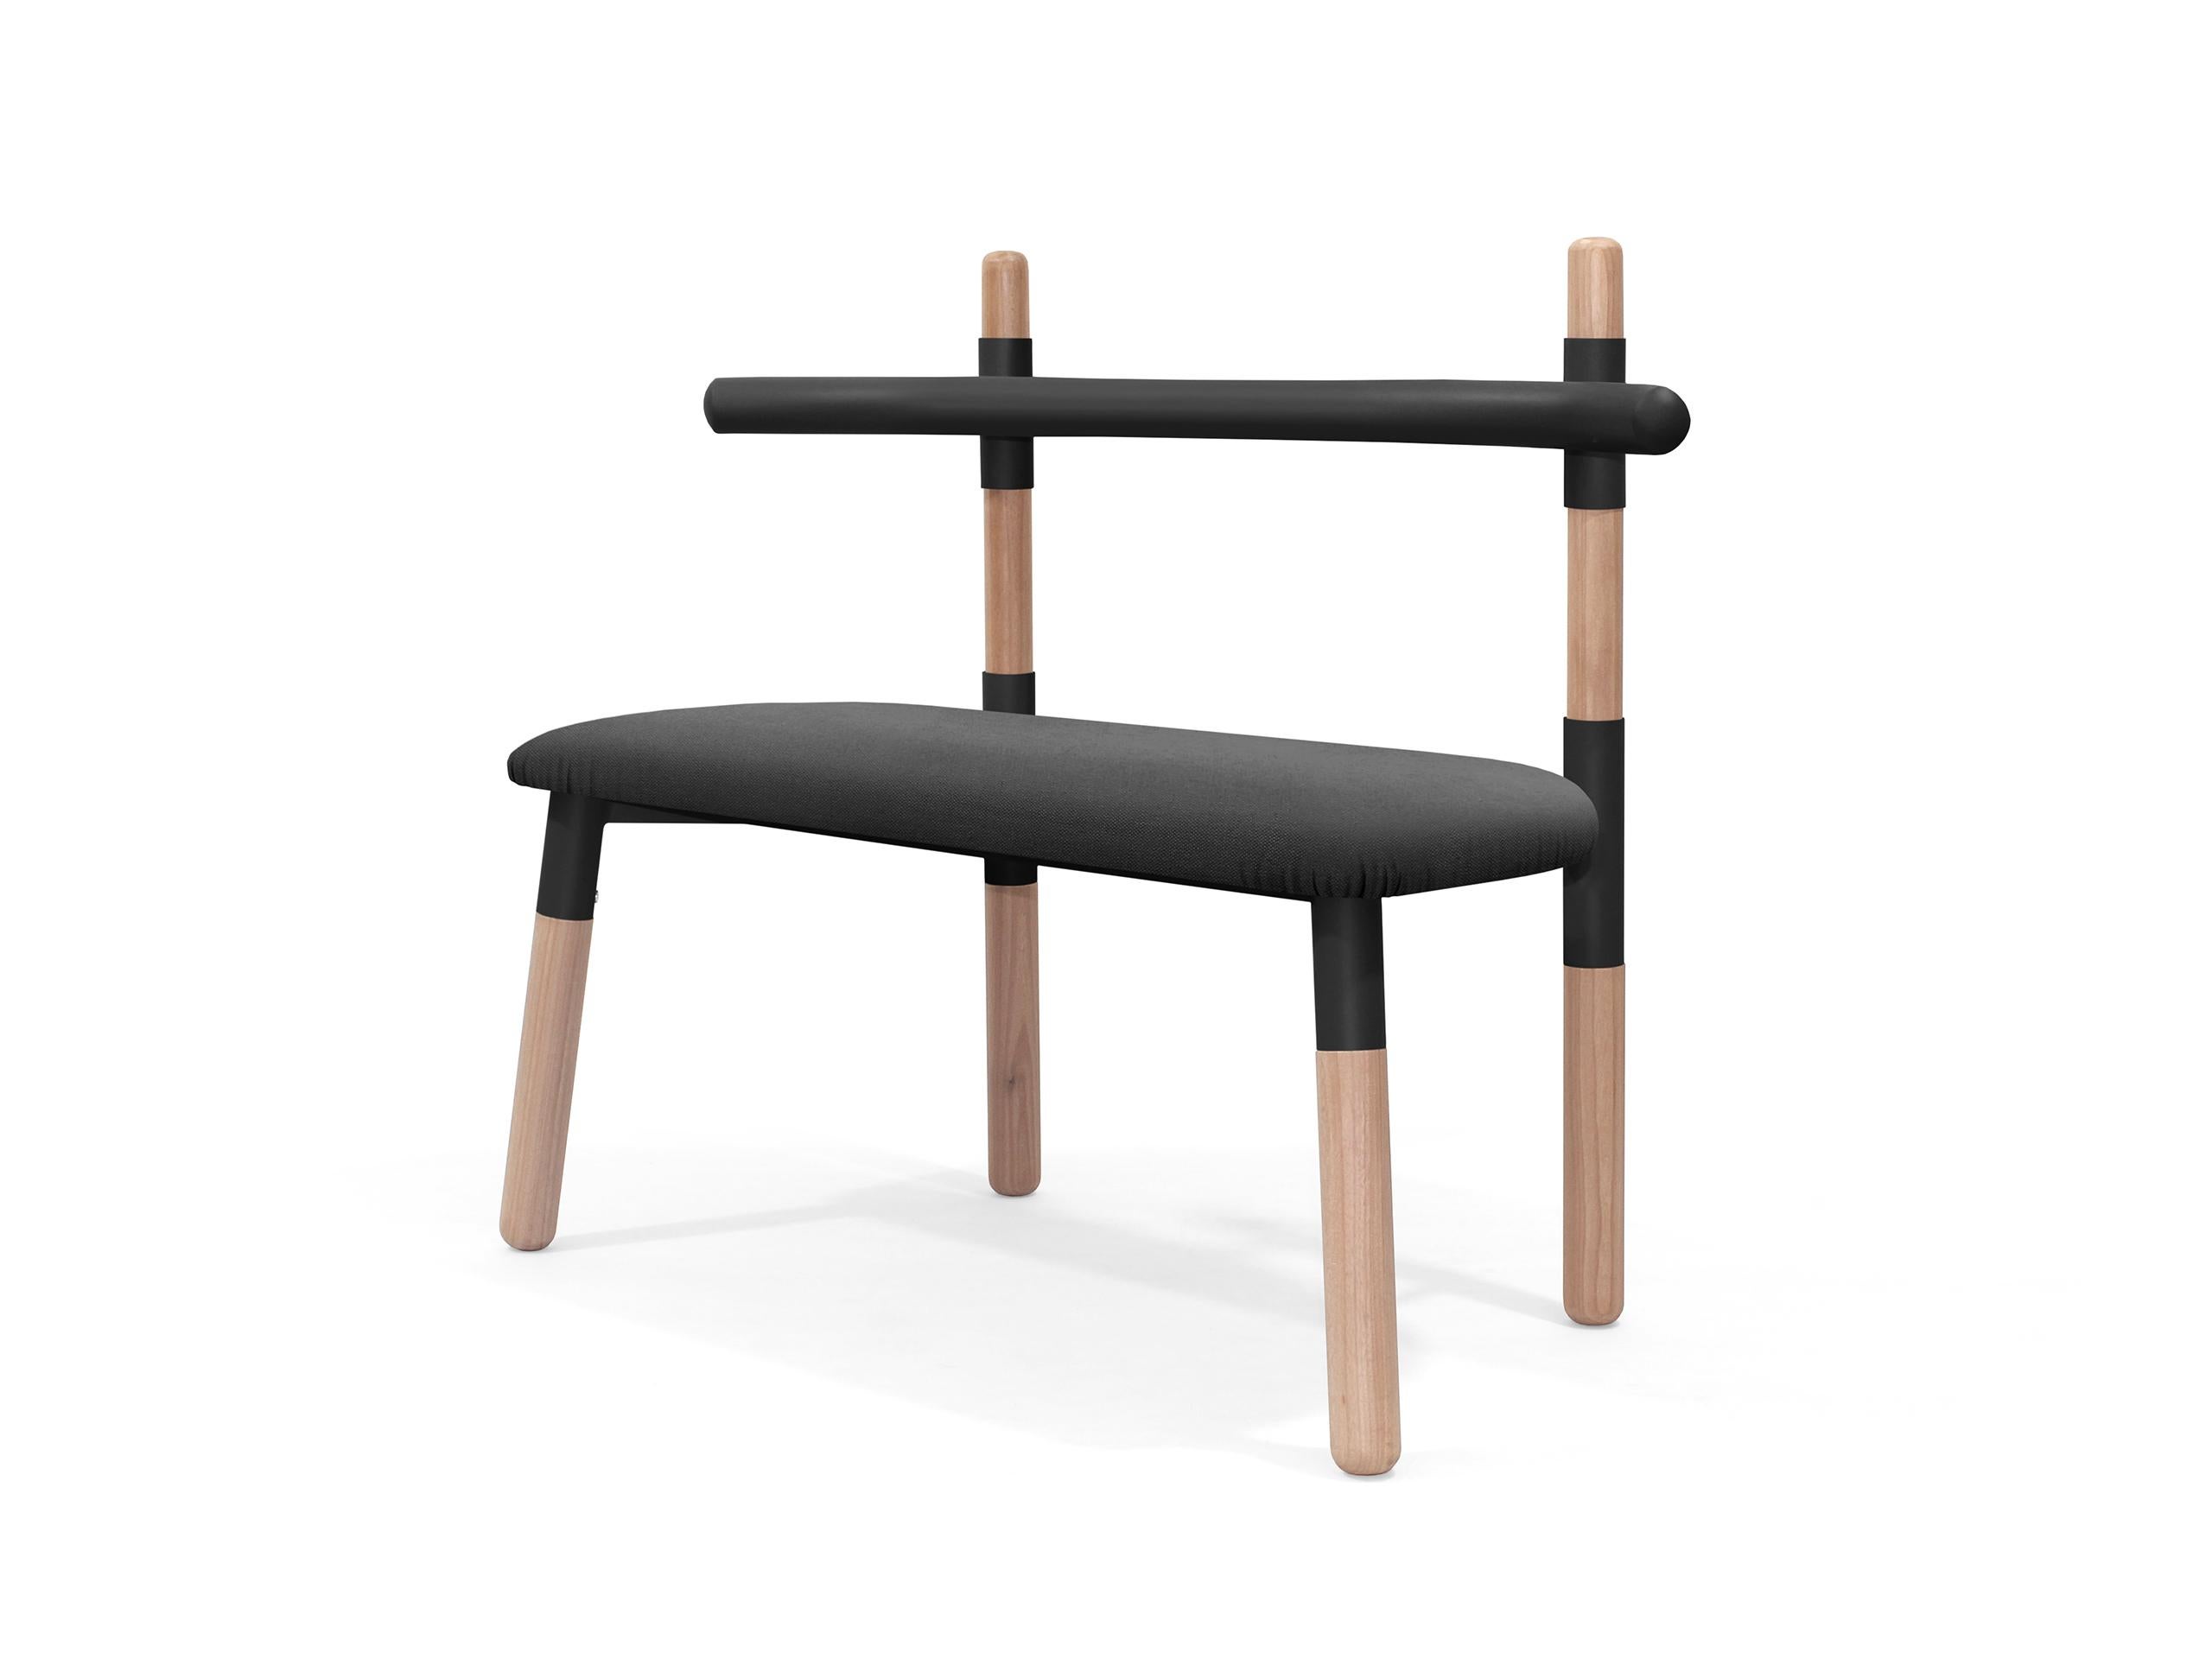 PK14 double chair is inspired by wooden trusses used in the construction of roofs.
The chair sockets refer to the “Gusset Plate” normally applied to reinforce the knots of wooden trusses.
Handmade carbon steel structure receives a matte